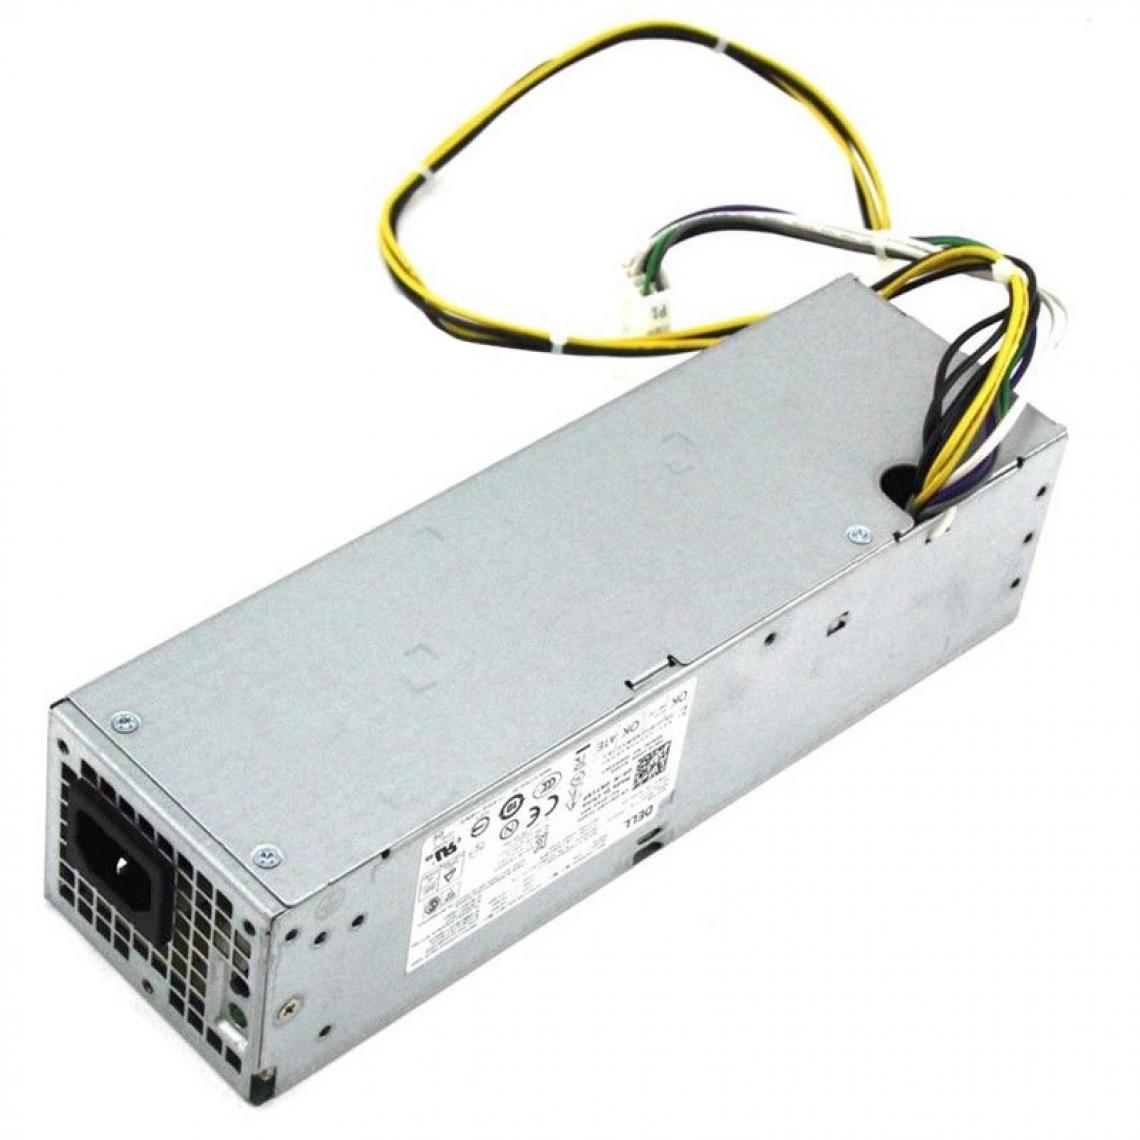 Dell - Alimentation DELL Optiplex 3020 SFF L255AS-00 PS-3261-2DF 0NT1XP 255W Power Supply - Alimentation modulaire